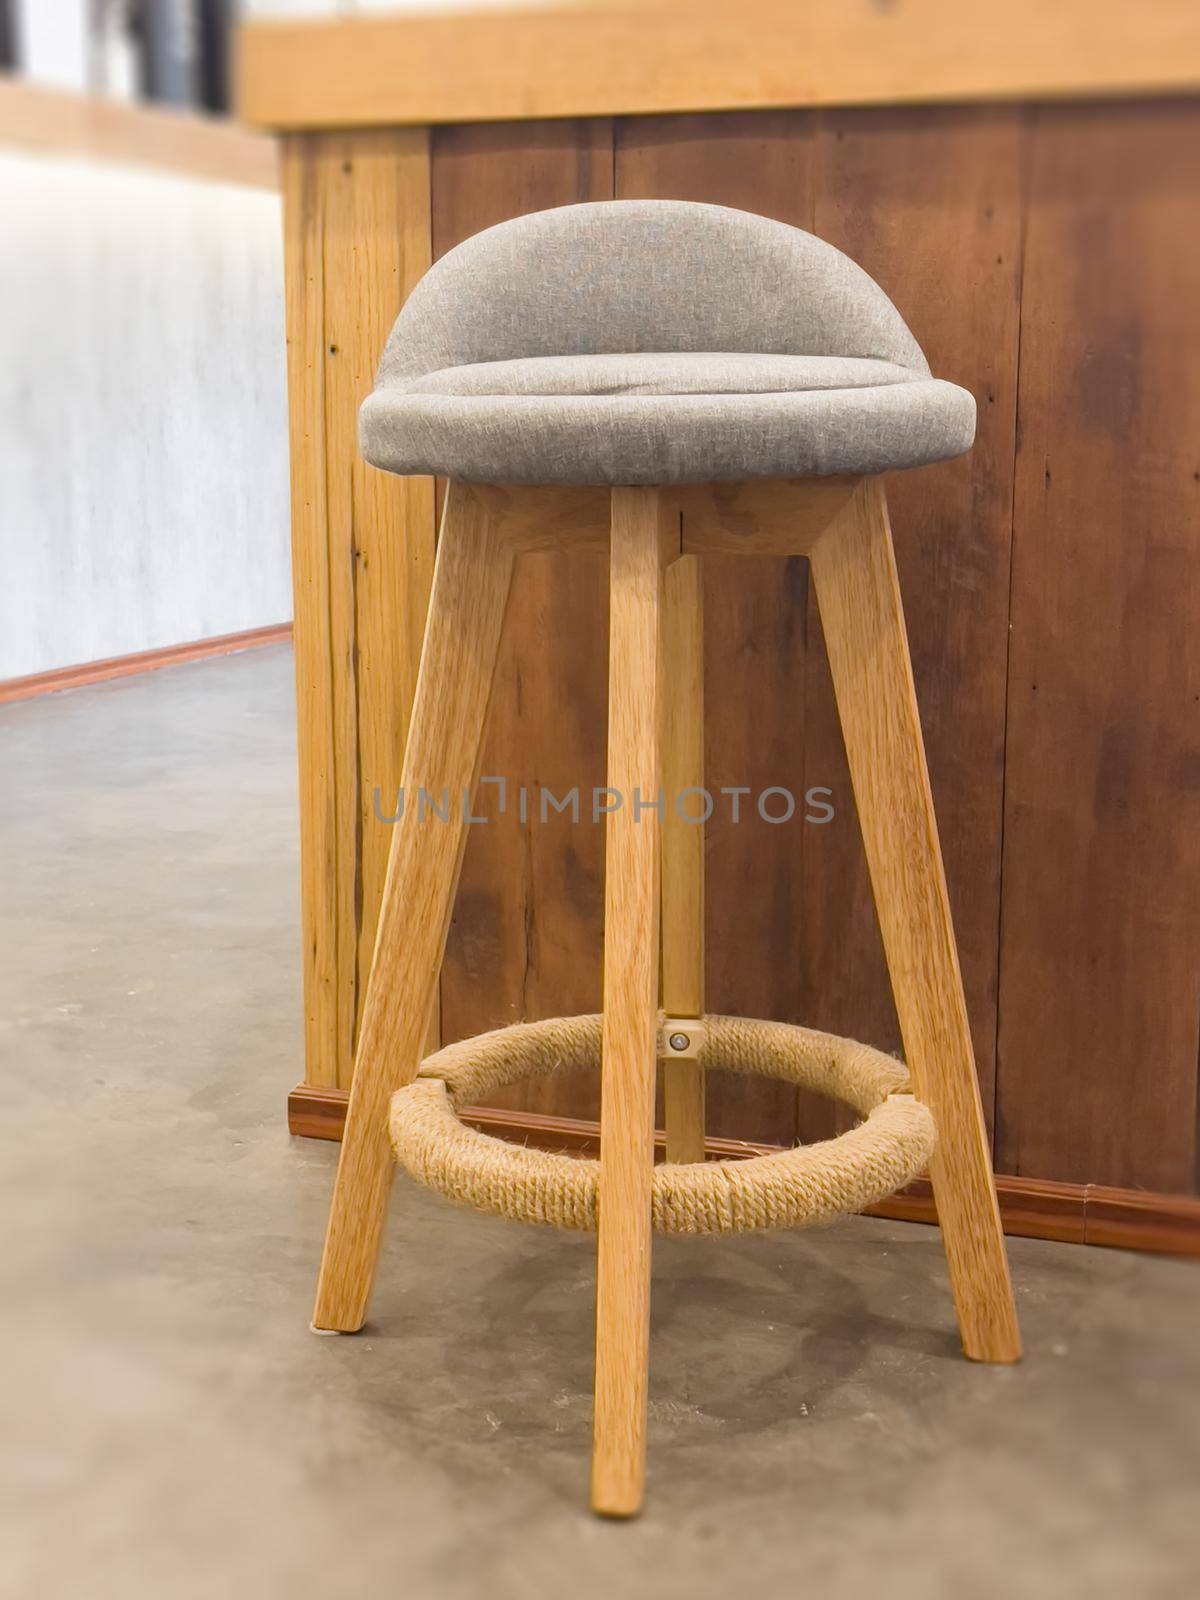 Wooden chair decorated in coffee shop, stock photo